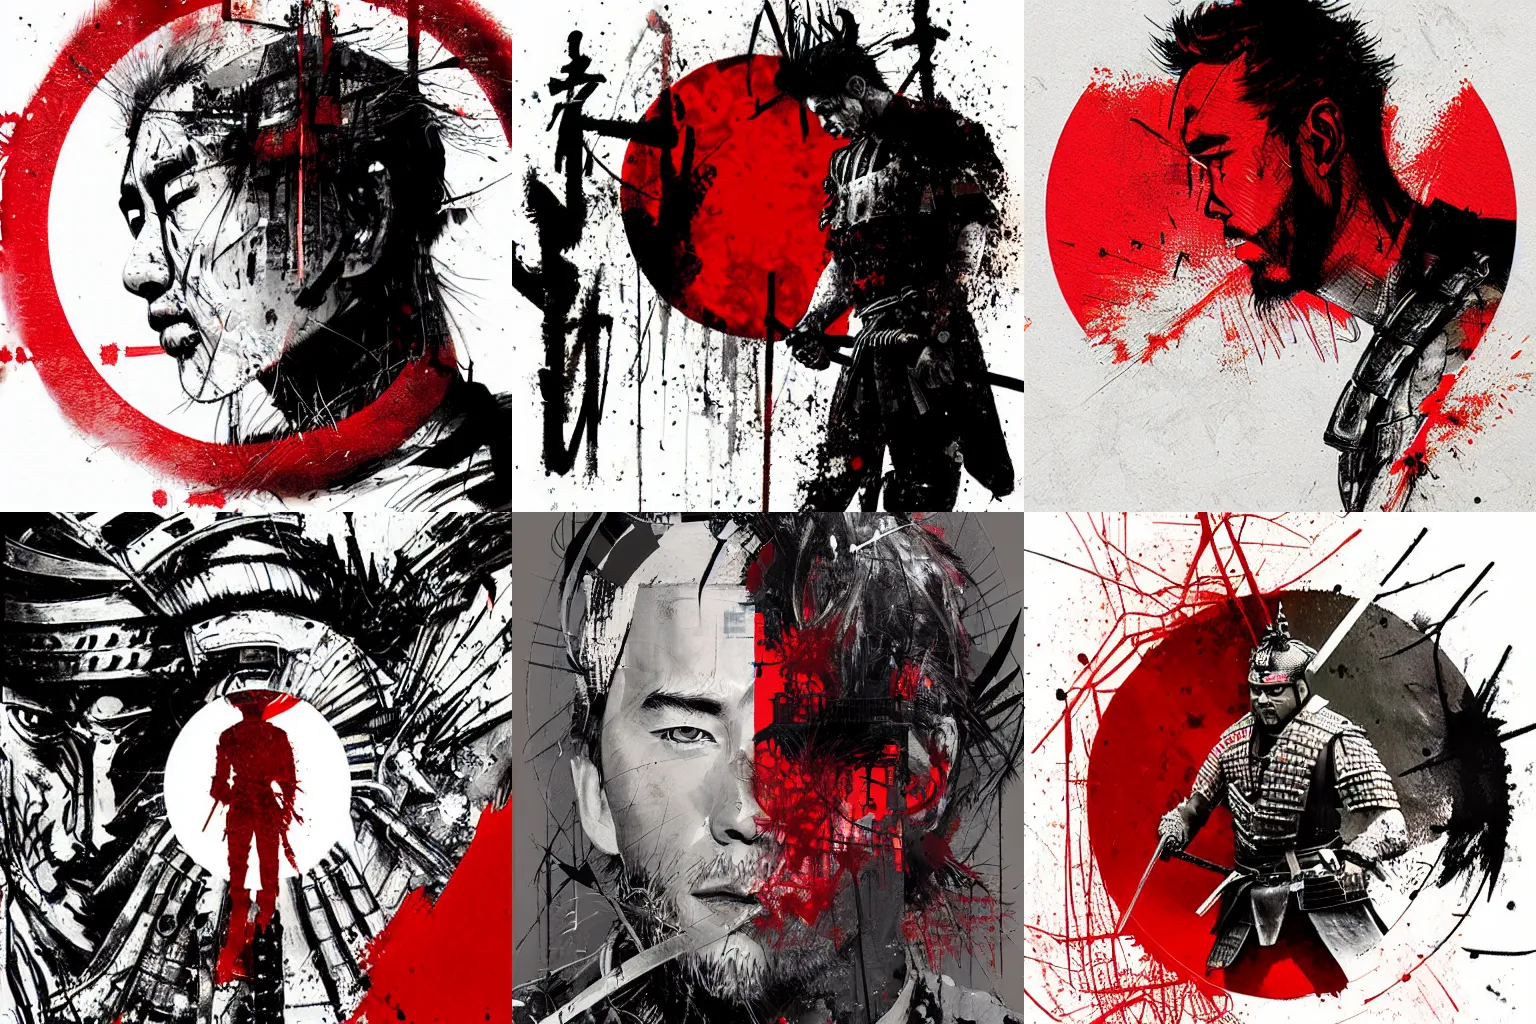 Prompt: artwork by SPARTH and Russ Mills showing a samurai in front of a red circle